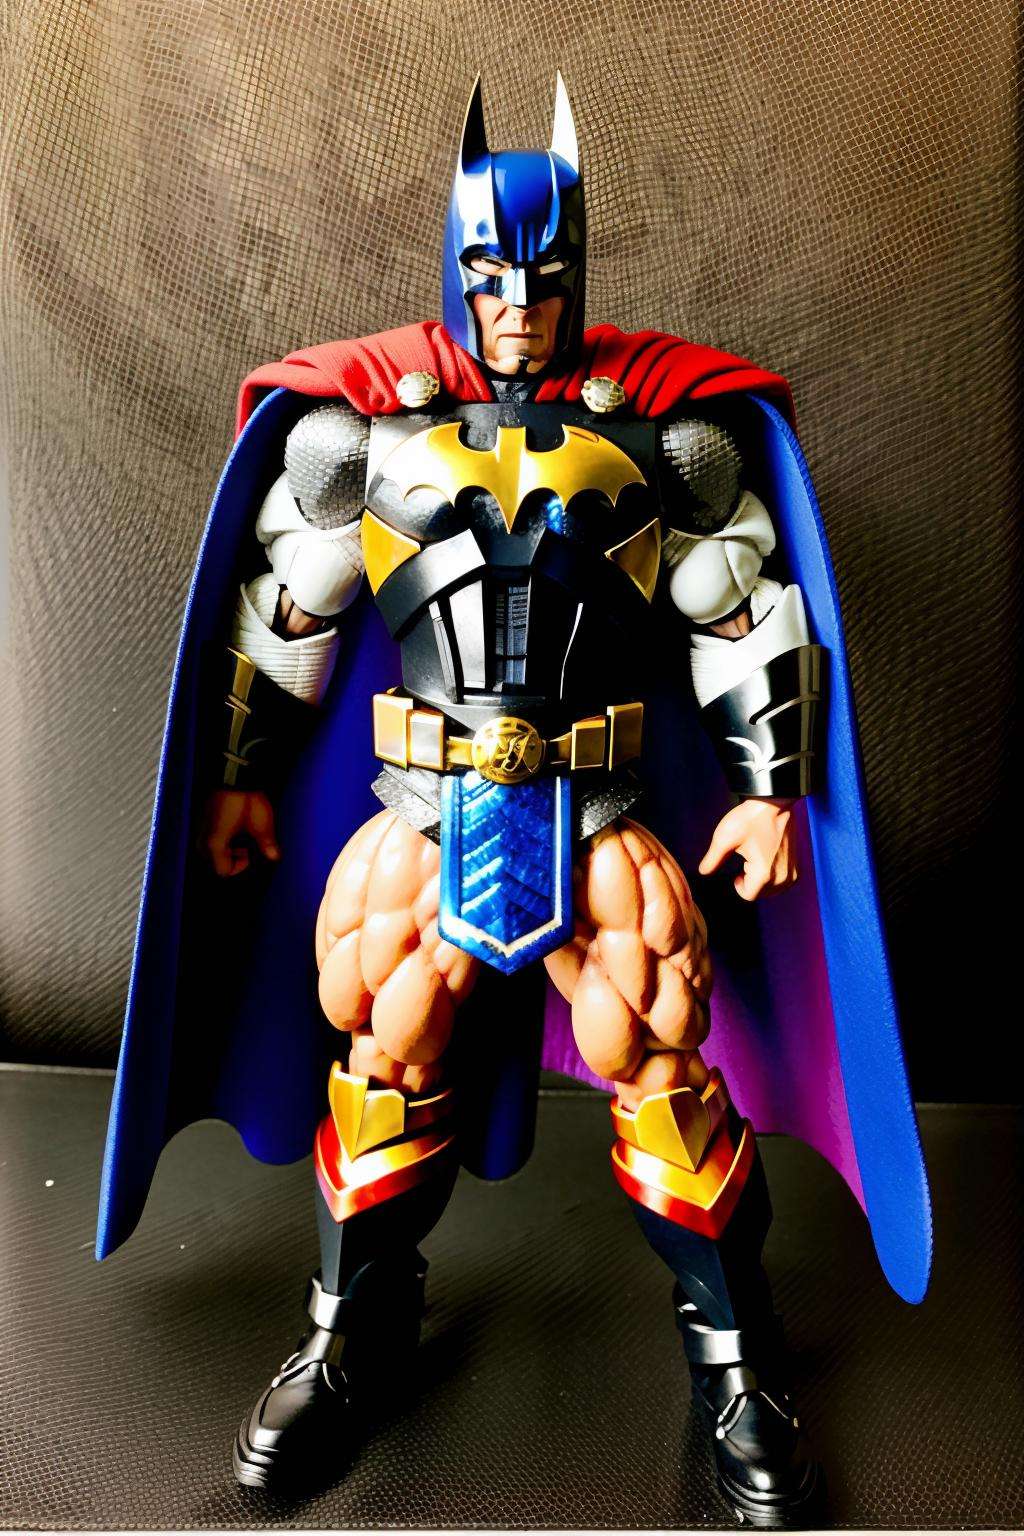 BatThor: A fusion of Batman and Thor, this action figure strikes a balance between vigilante justice:0.5 and godly thunder:0.5. , awe_toys